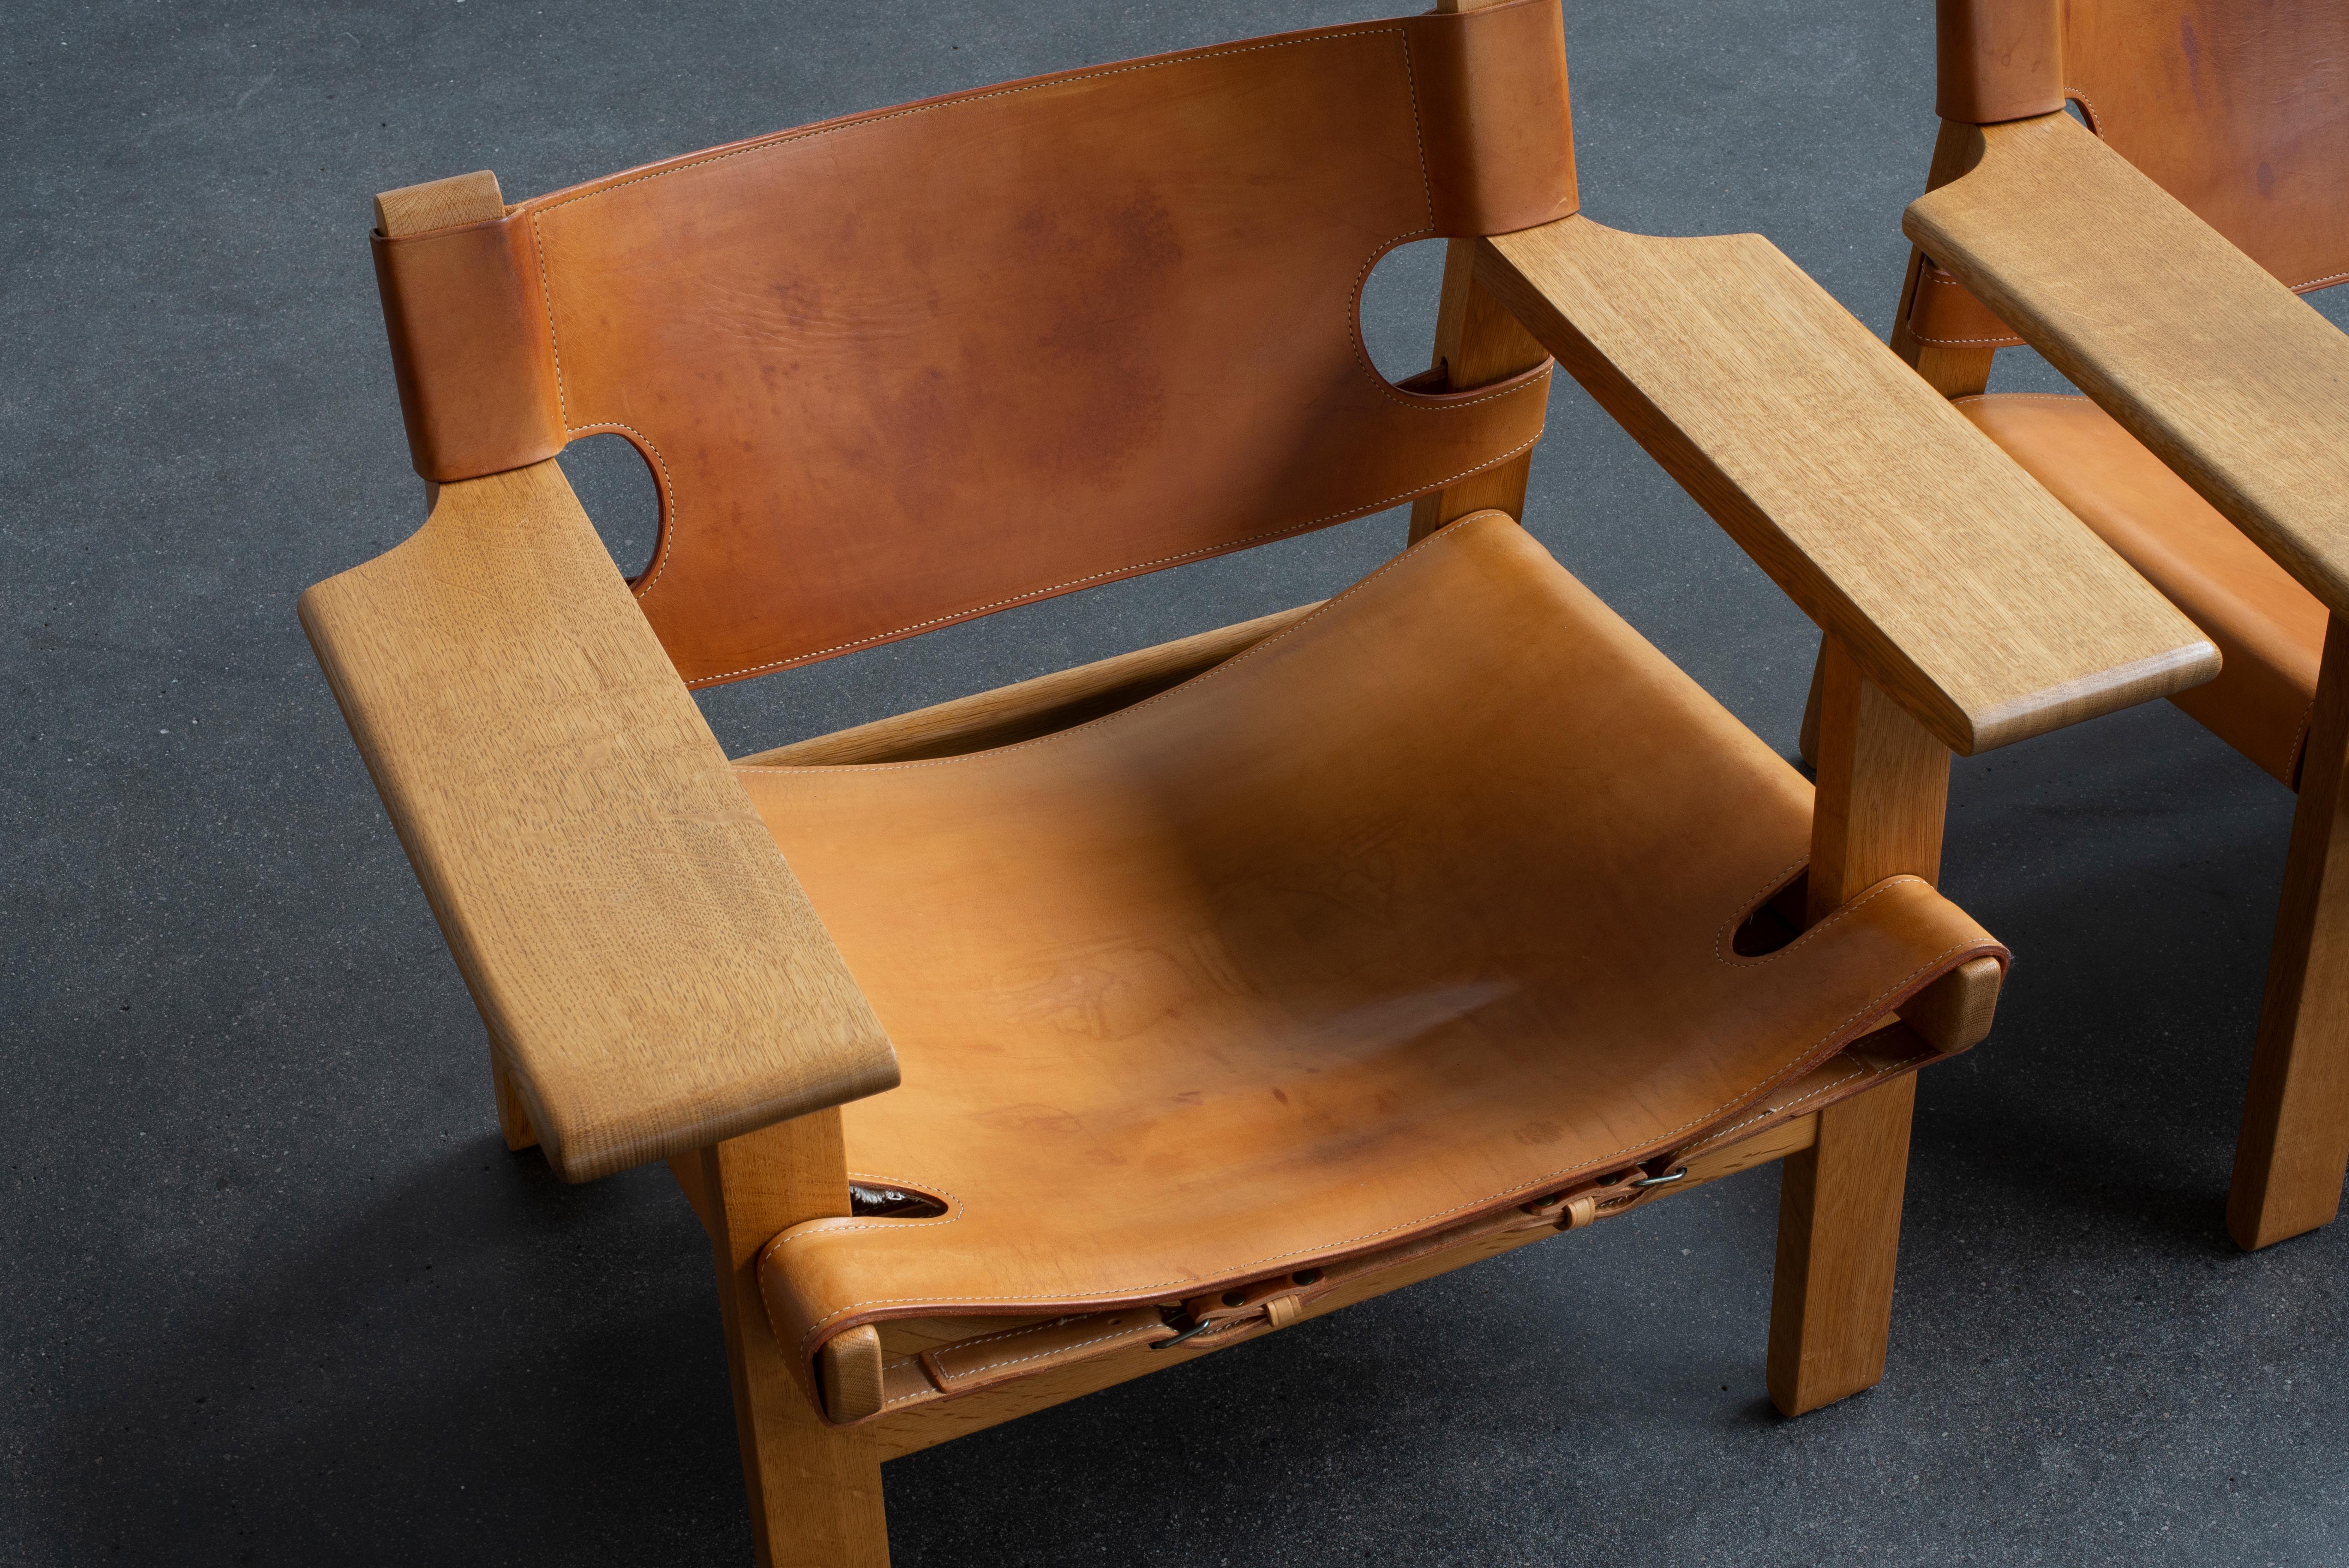 20th Century Børge Mogensen Pair of Spanish Chairs for Fredericia Furniture